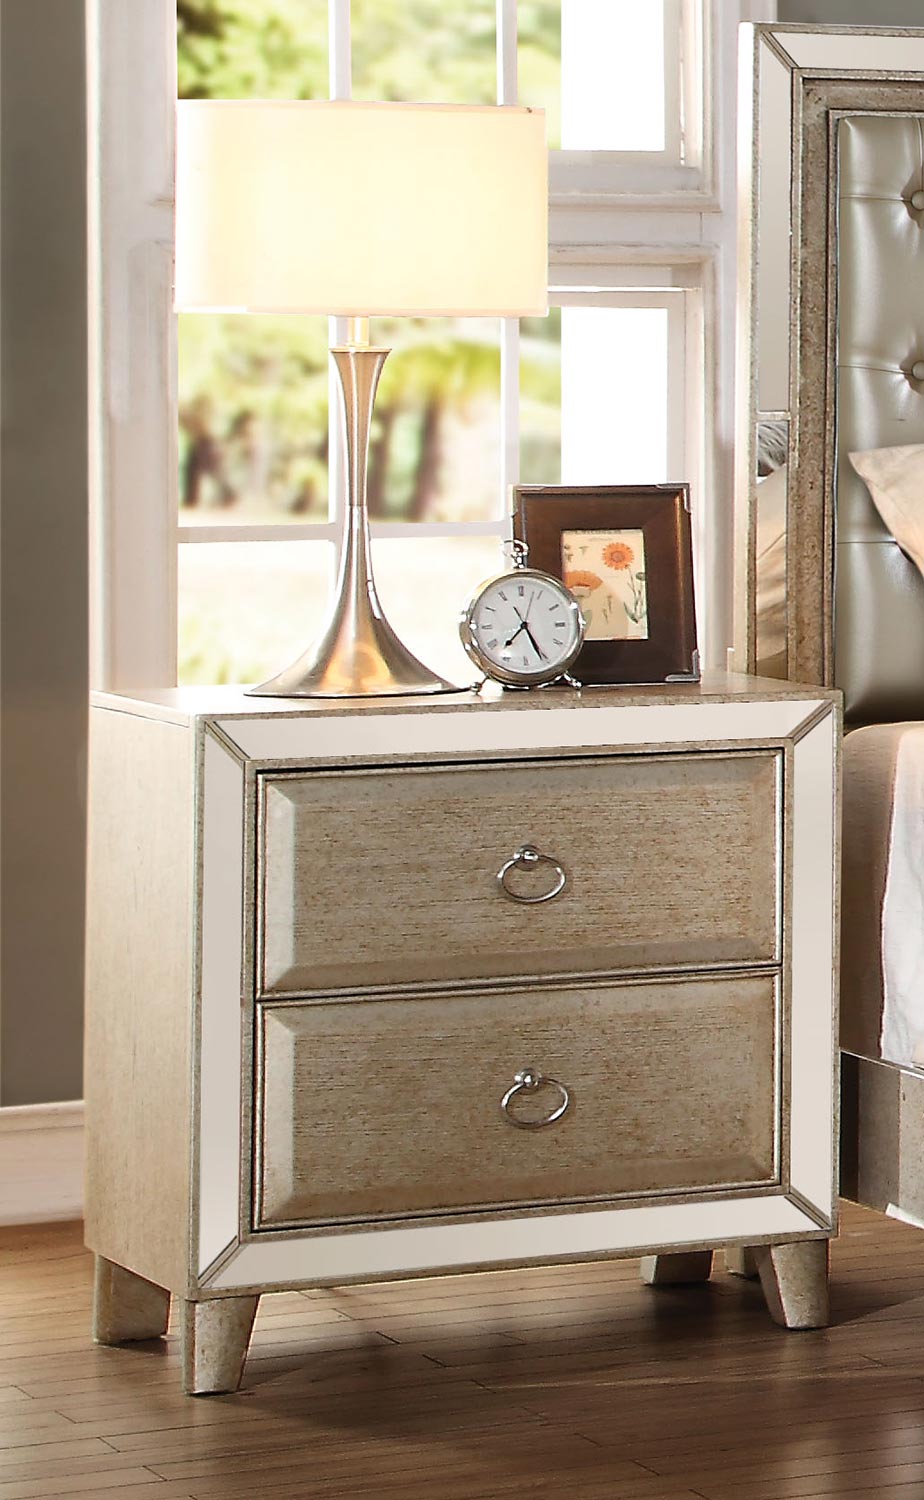 Acme Voeville Nightstand - Antique Gold